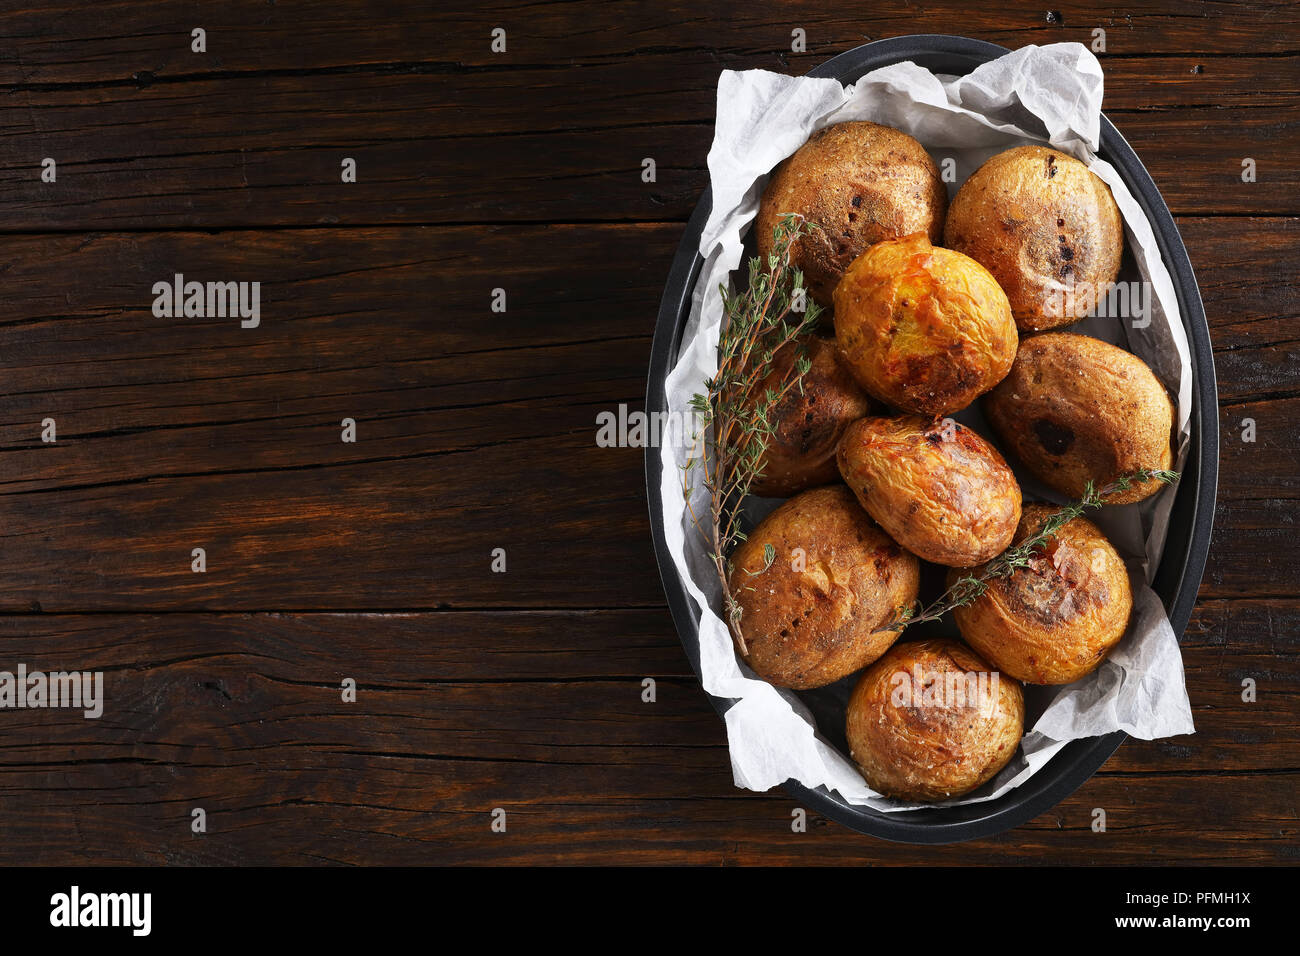 freshly baked whole potatoes with thyme in baking dish on wooden table, horizontal view from above Stock Photo